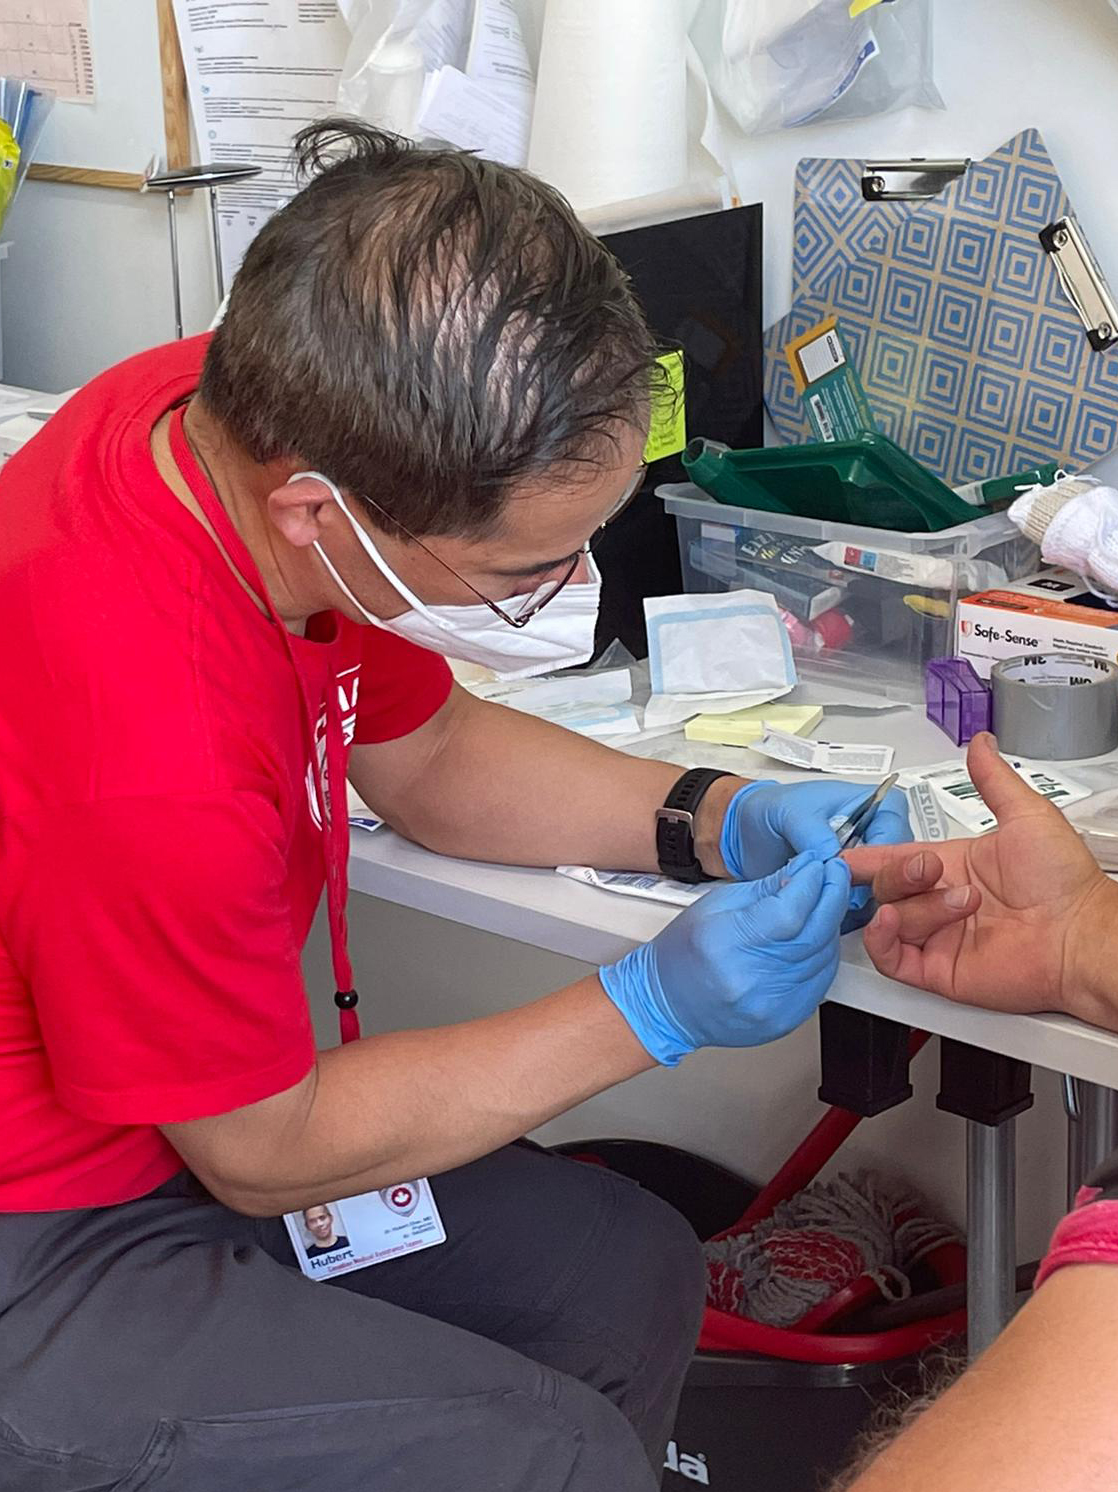 Dr. Hubert Chao treats a patient in May 2022 while on a CMAT mission to provide medical care in Ukraine.